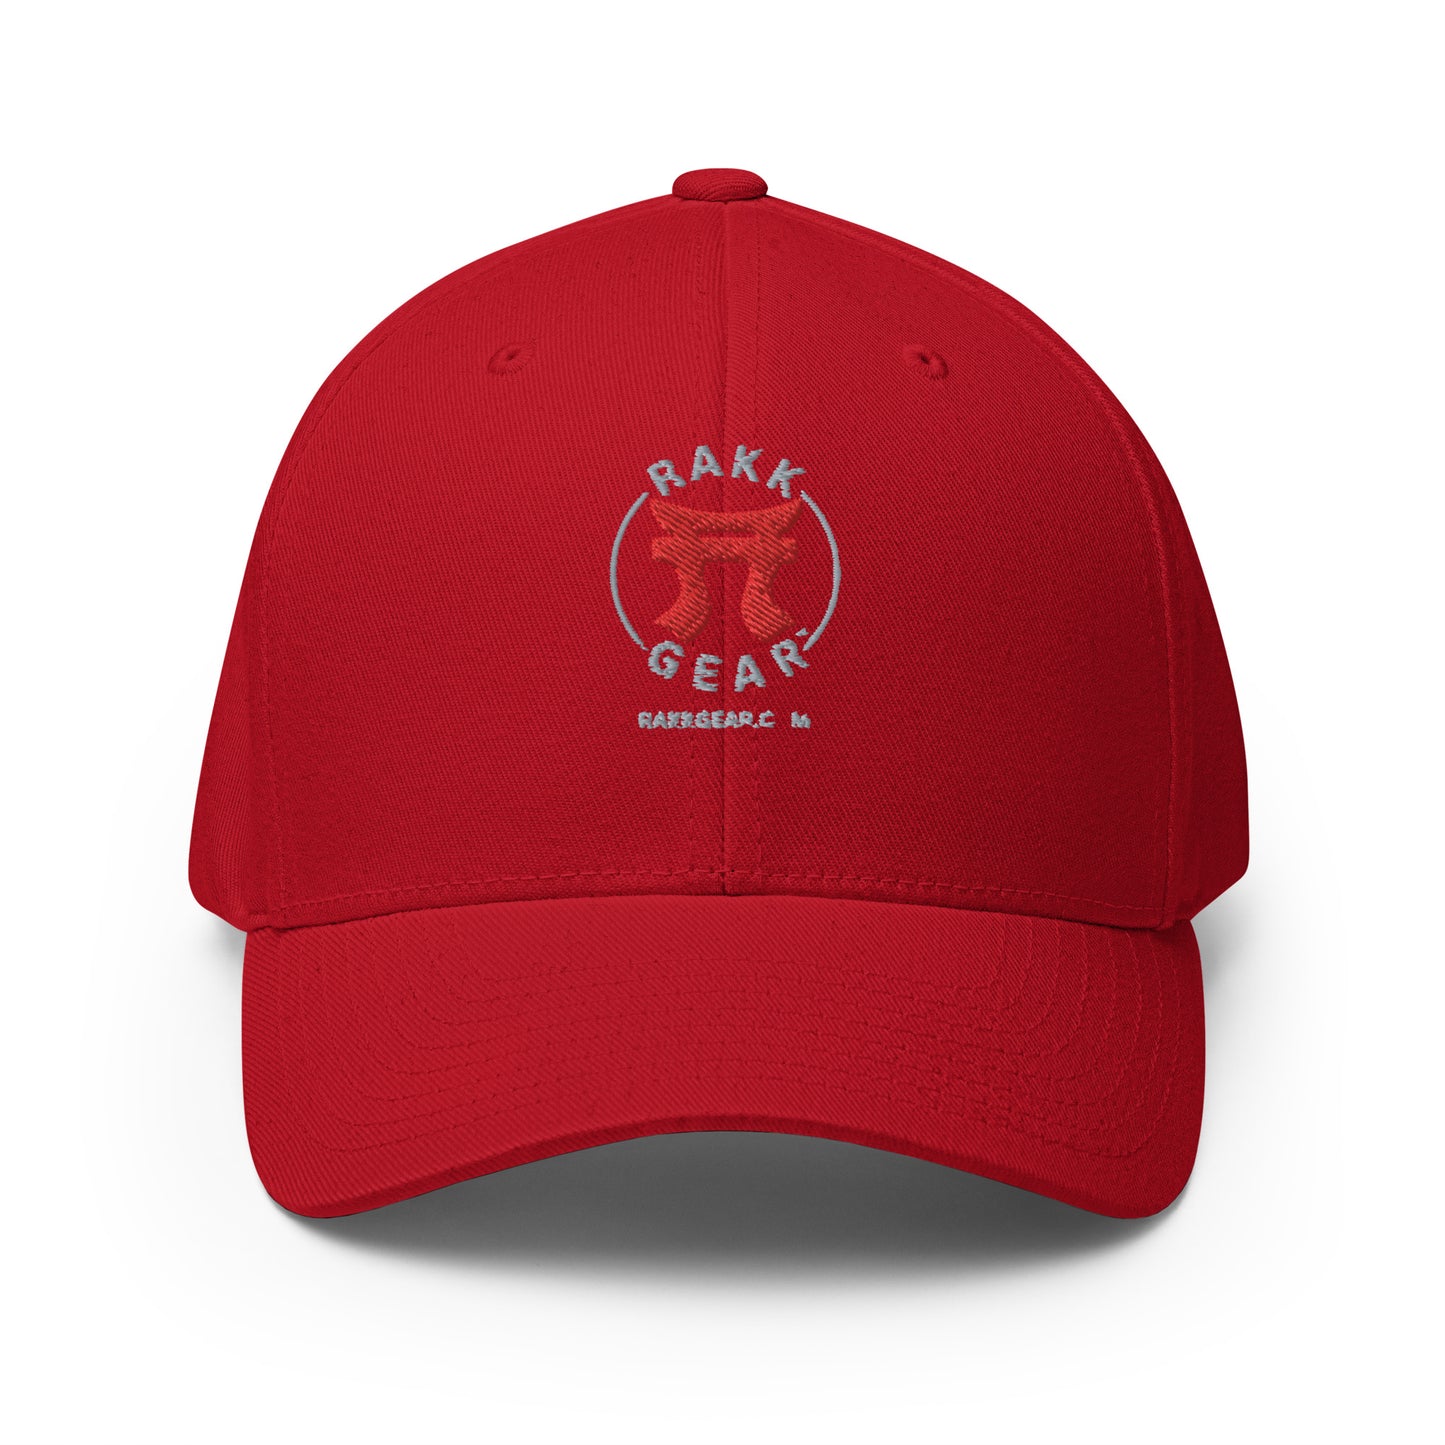 Rakkgear Embroidered Red Fitted Baseball Cap: Stylish cap with Iconic Rakkgear Logo embroidery on the front.